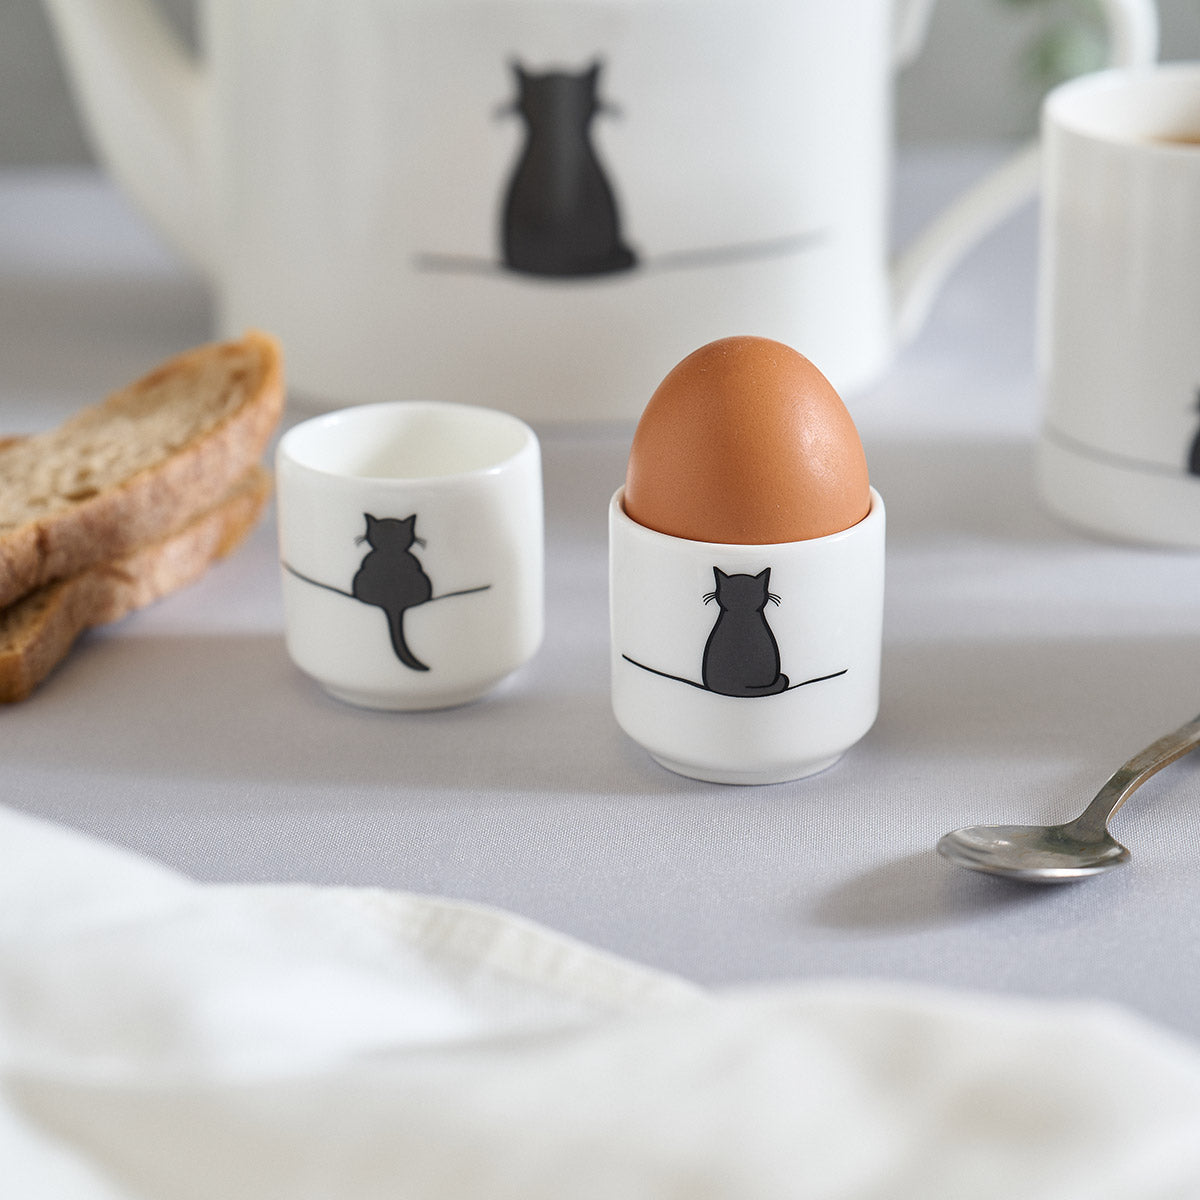 Cat Egg Cups with egg and toast